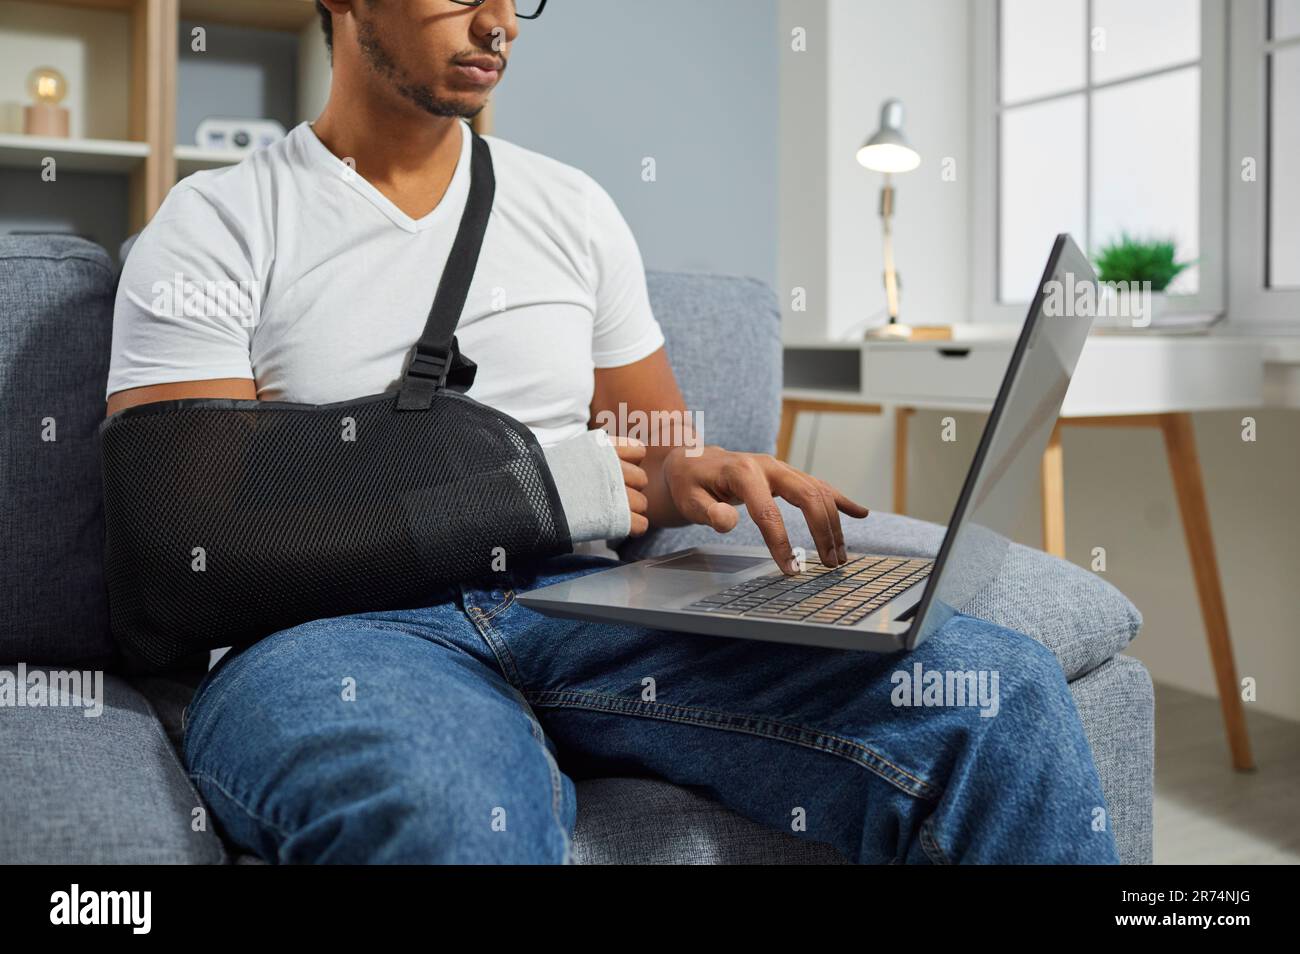 Young man with an arm sling on his broken wrist sitting on the sofa and working on his laptop Stock Photo